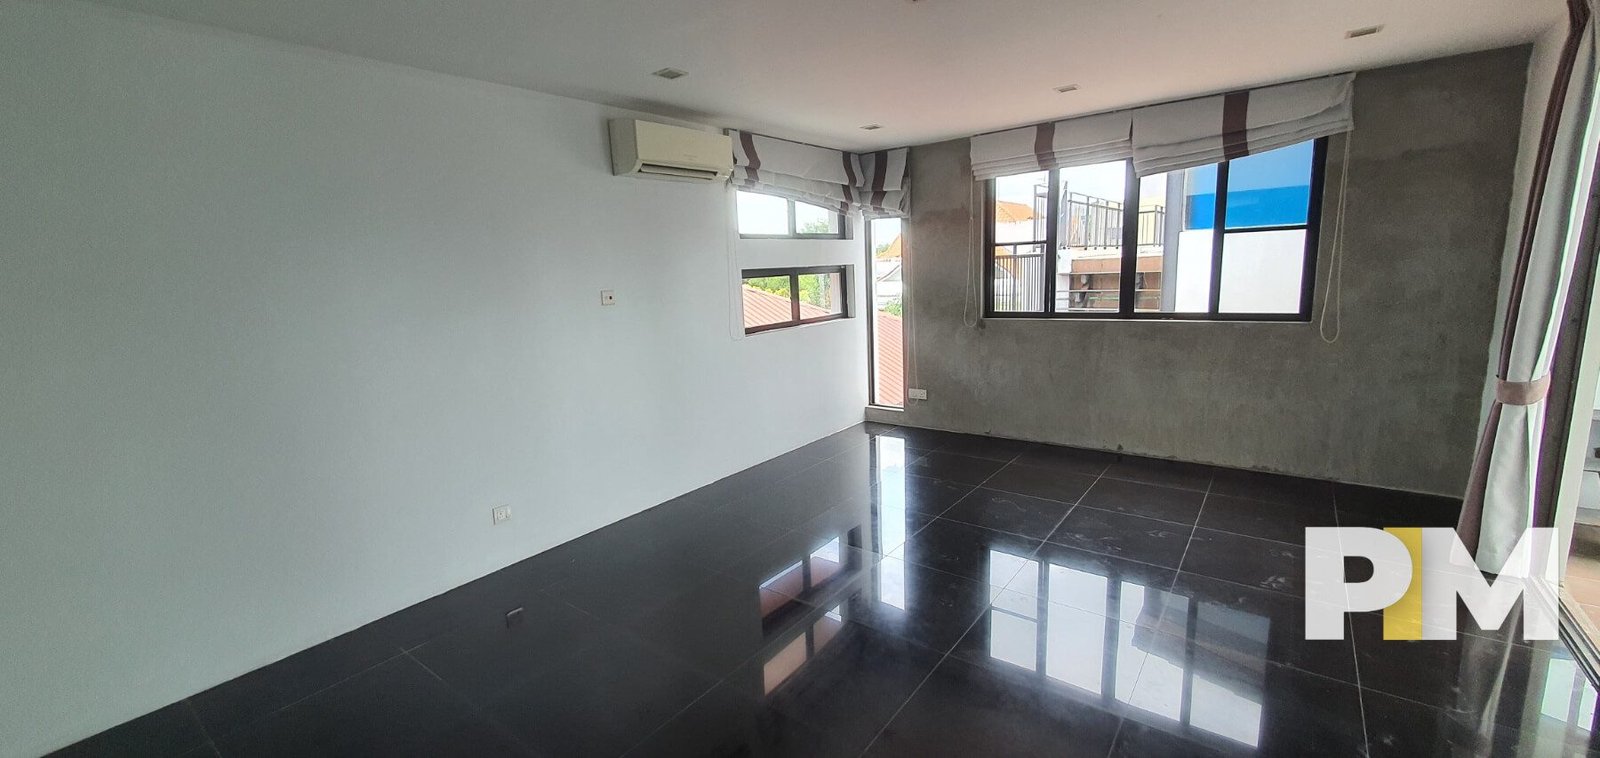 Open space with windows - Real Estate in Yangon